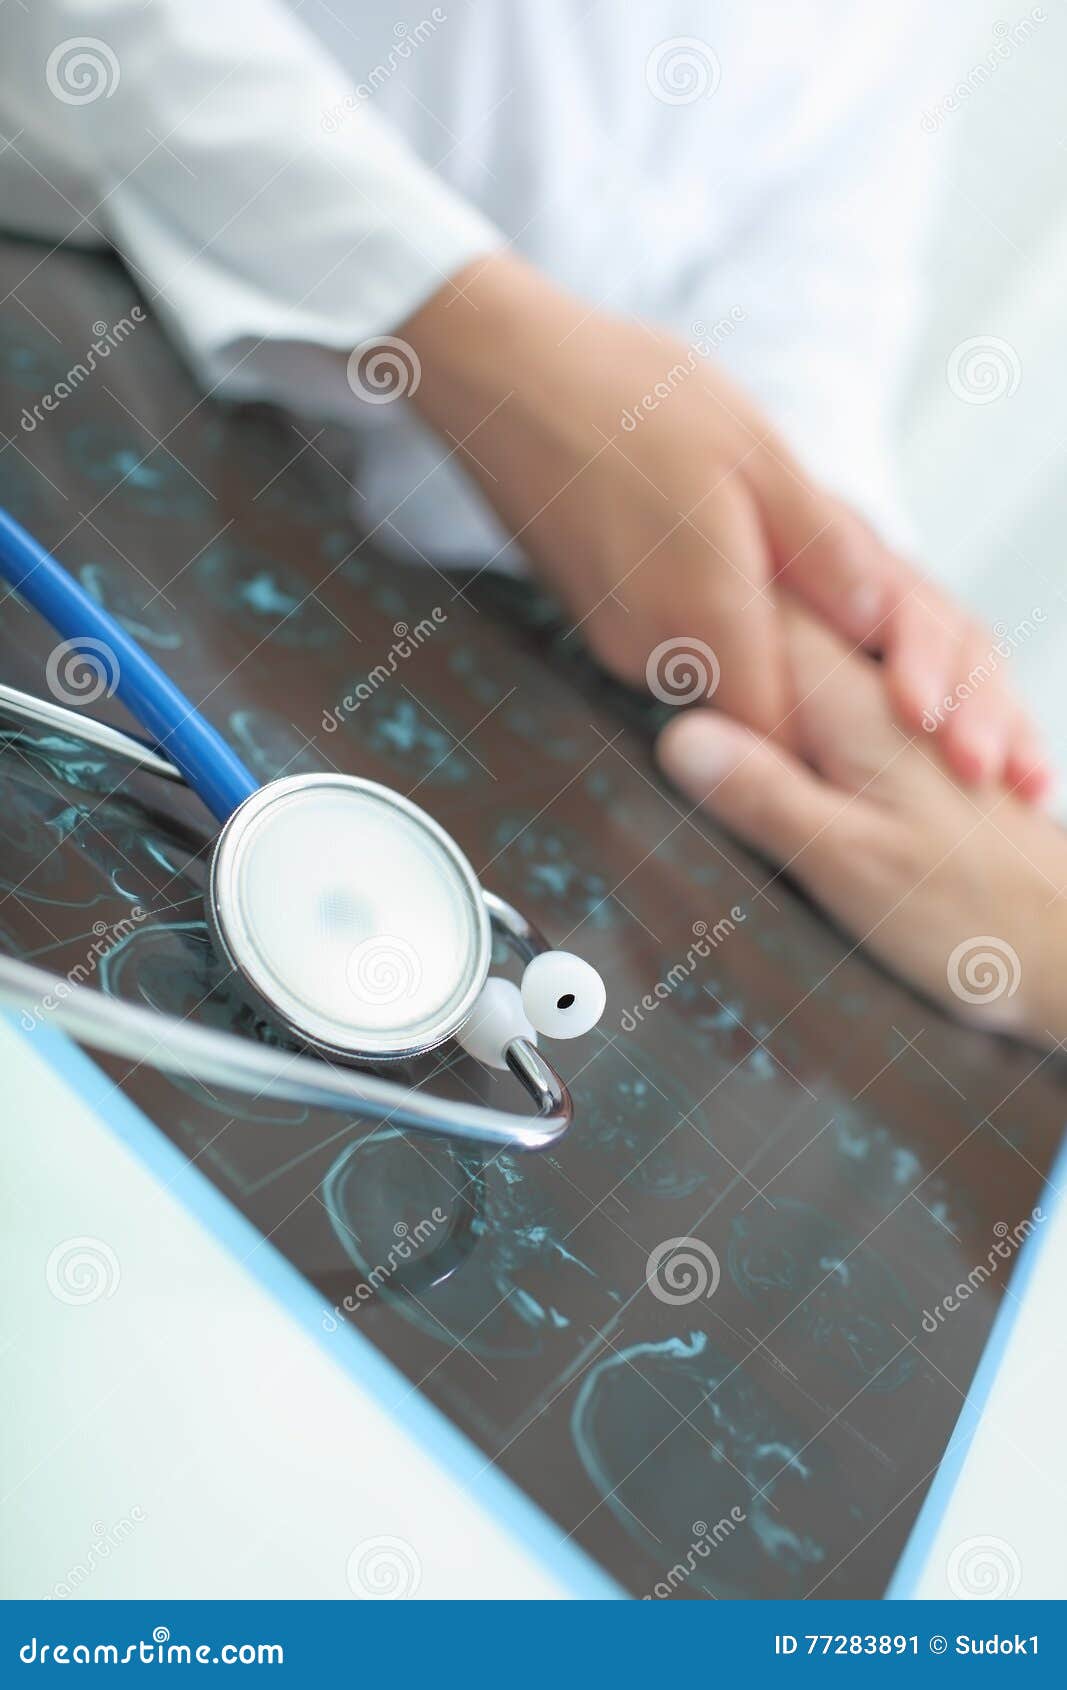 doctor consolating patient diagnosed with an incurable disease